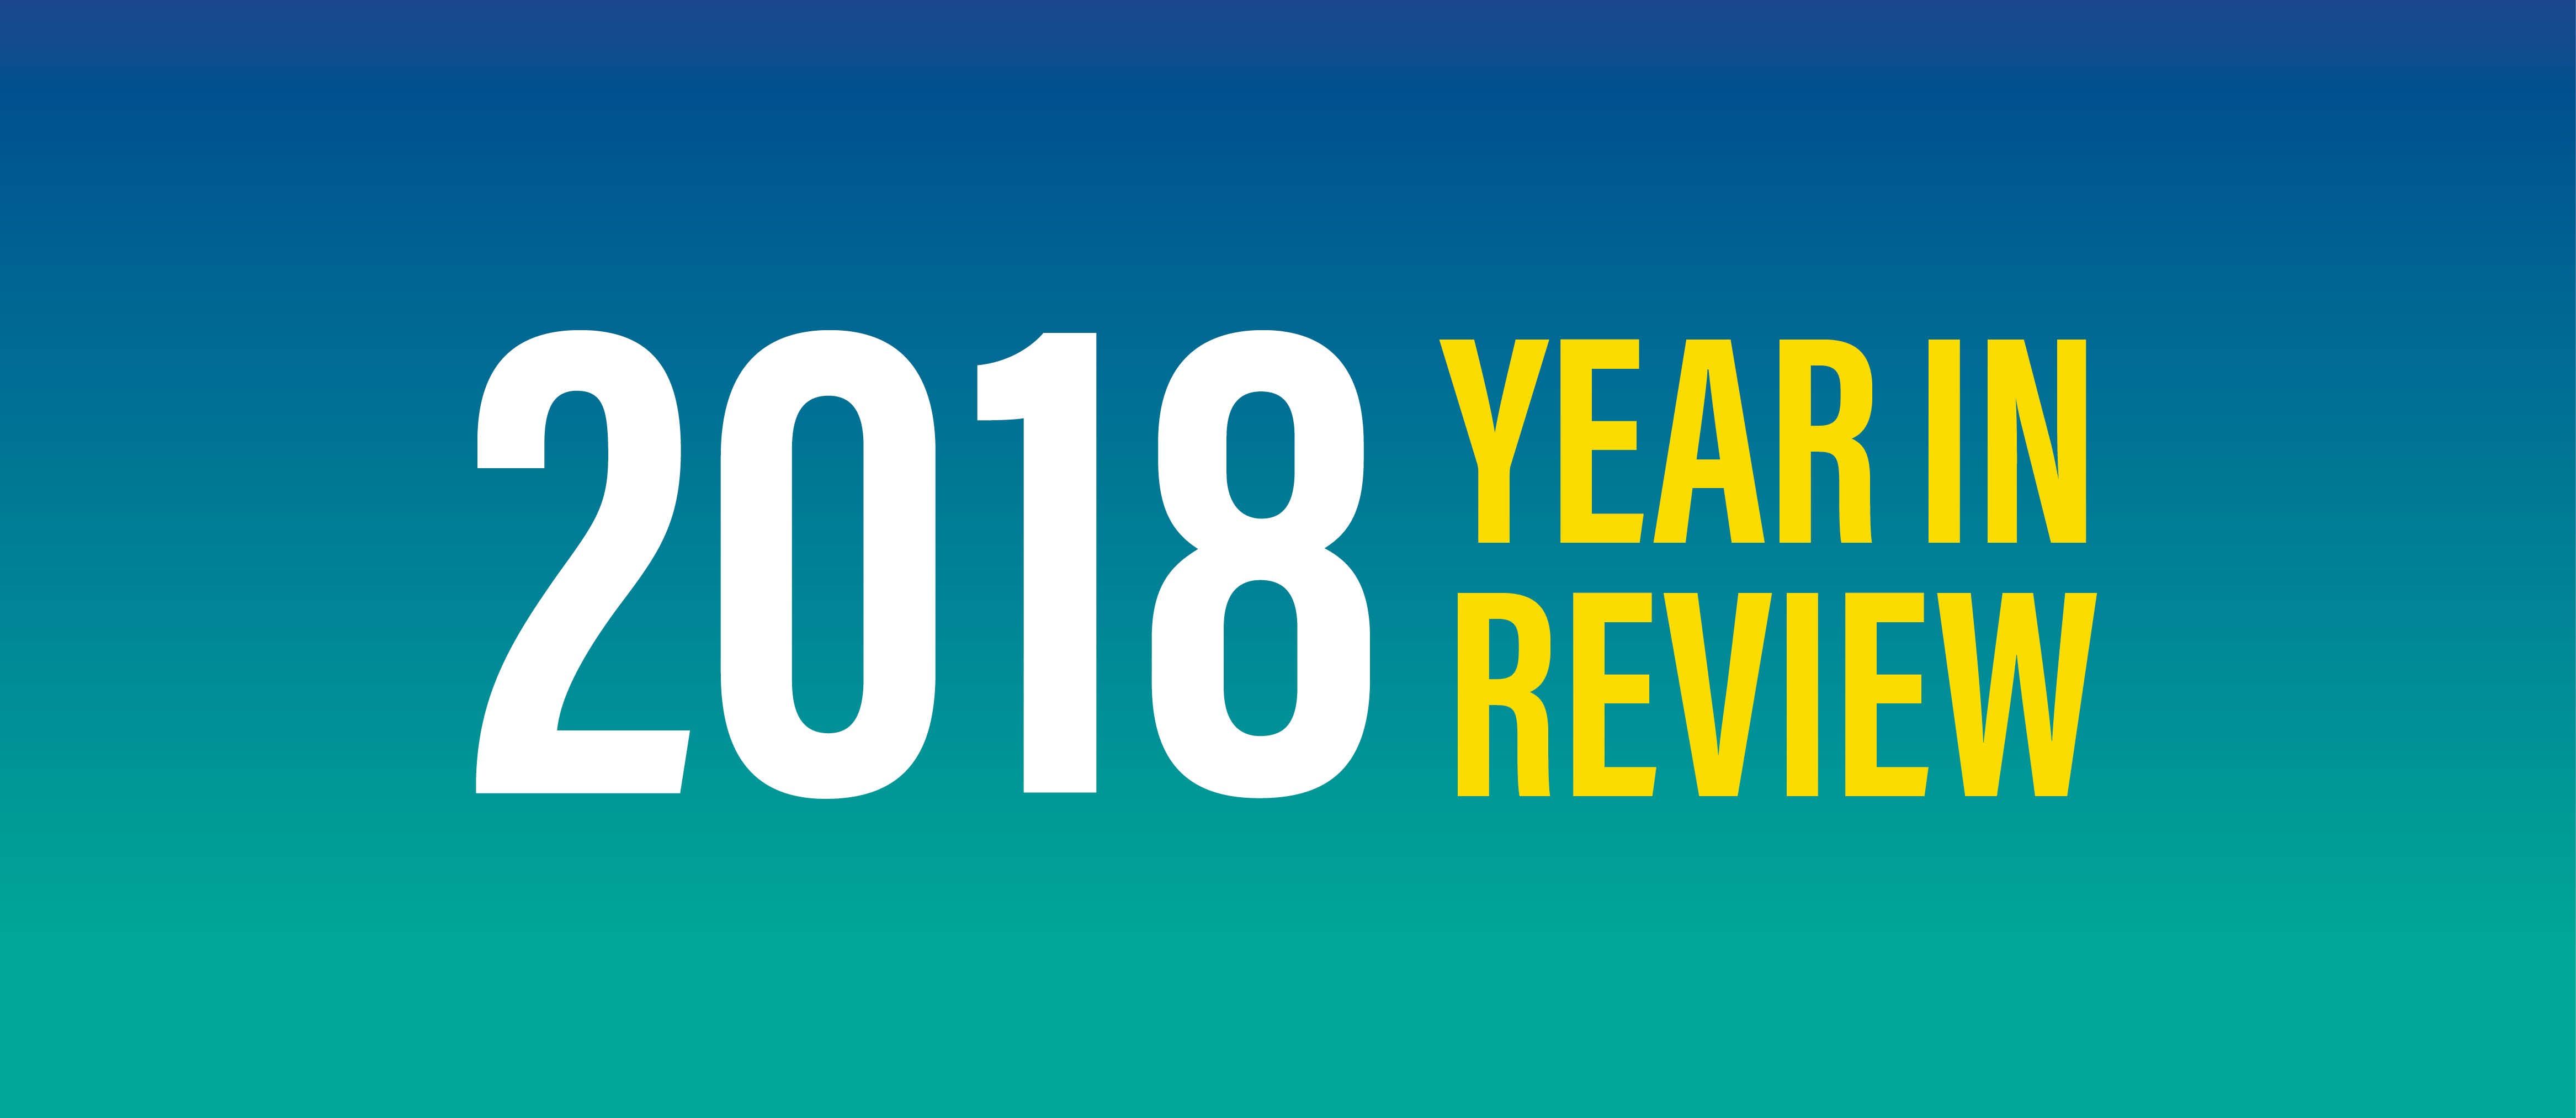 November 2018 Insight: 2018 Year in Review Resources Header